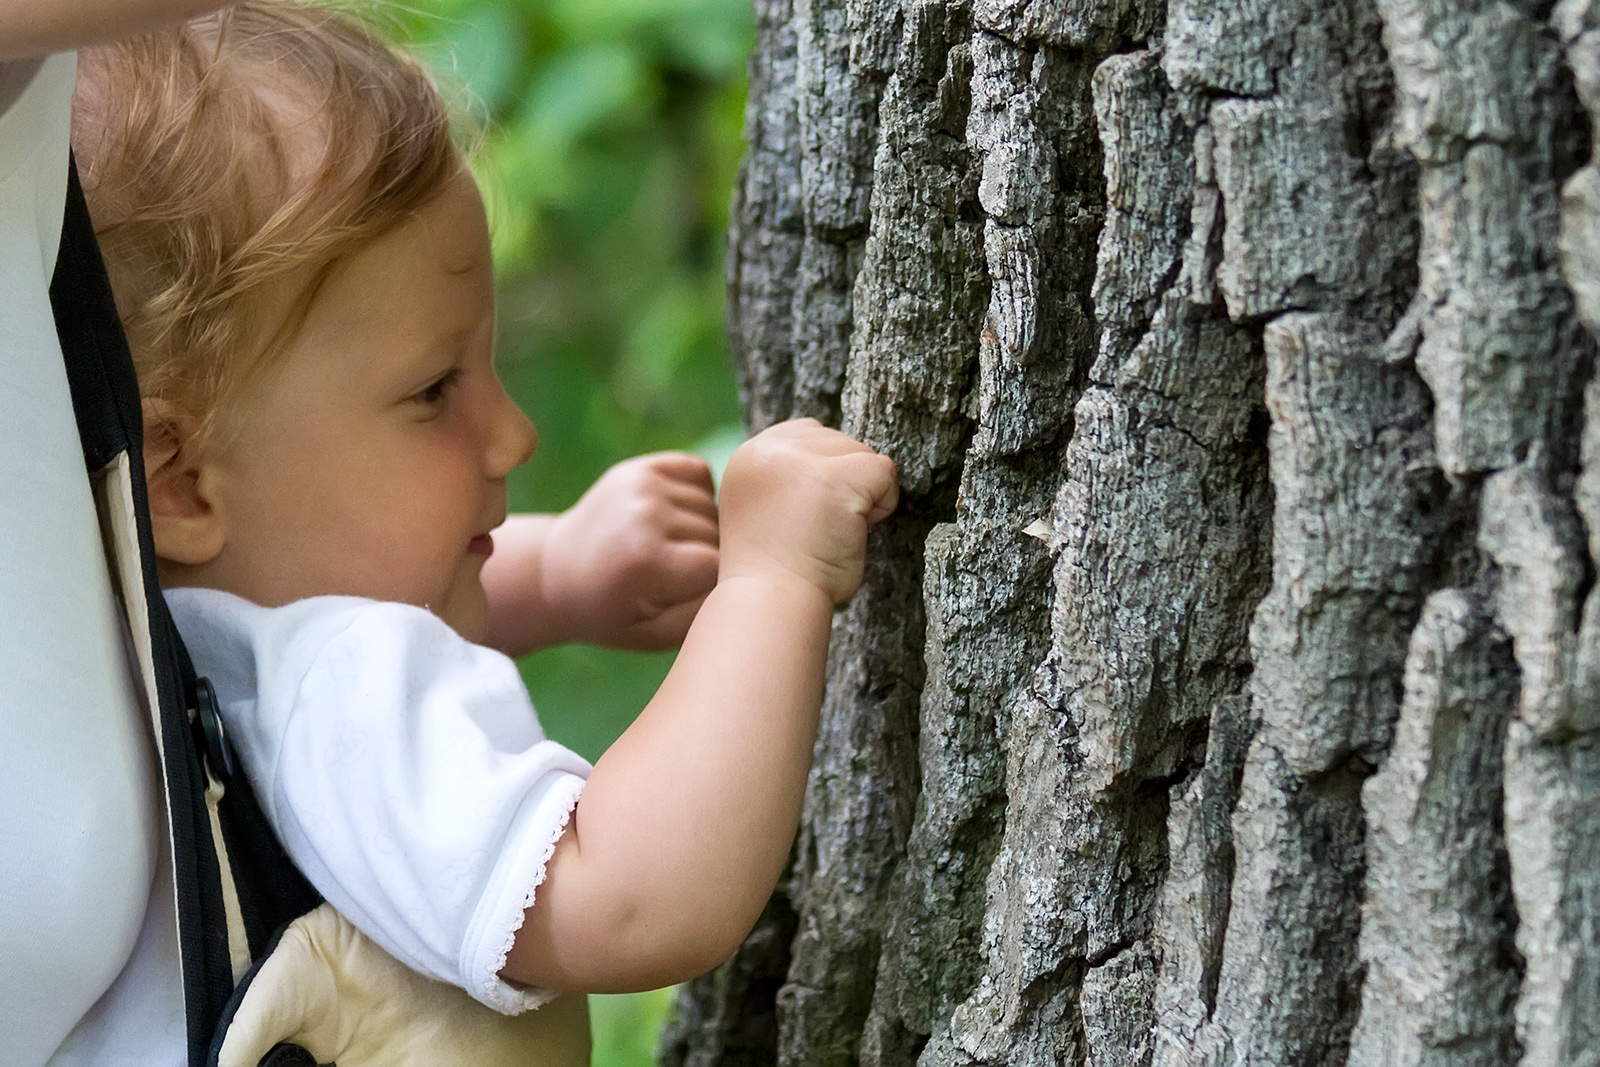 Perhaps she will one day be a treehugger. Padurea Domneasca National Park in Moldova.